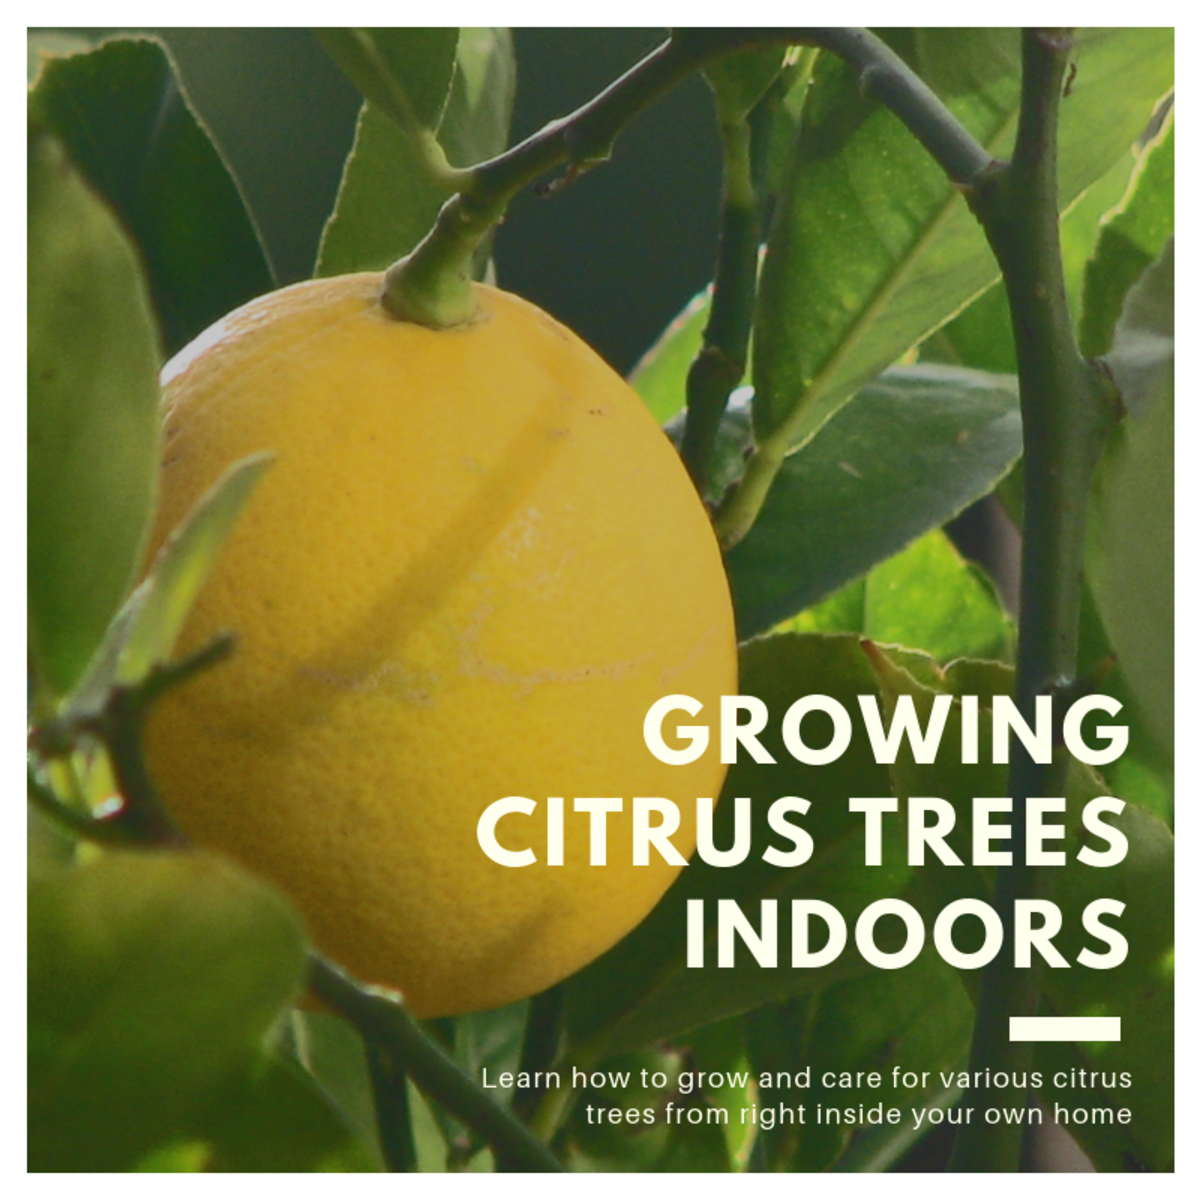 Growing citrus trees in containers indoors is easier than you might think, and this guide will show you everything you need to know.